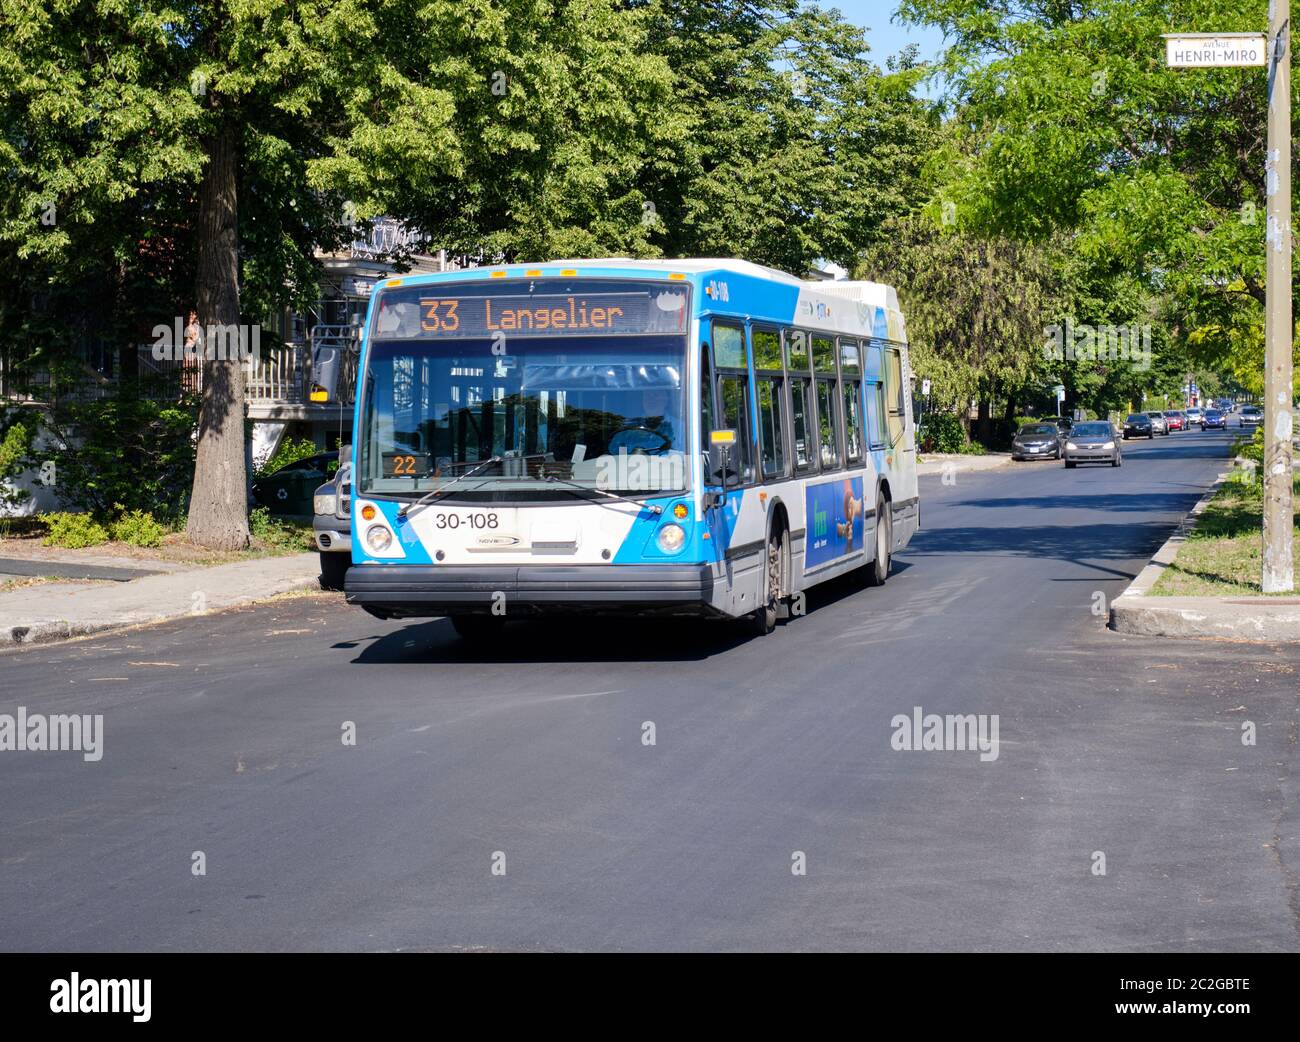 Montreal, Canada. June 15, 2020.  A Montreal STM city bus, number 33 Langelier, driving down a street on sunny summer day Stock Photo